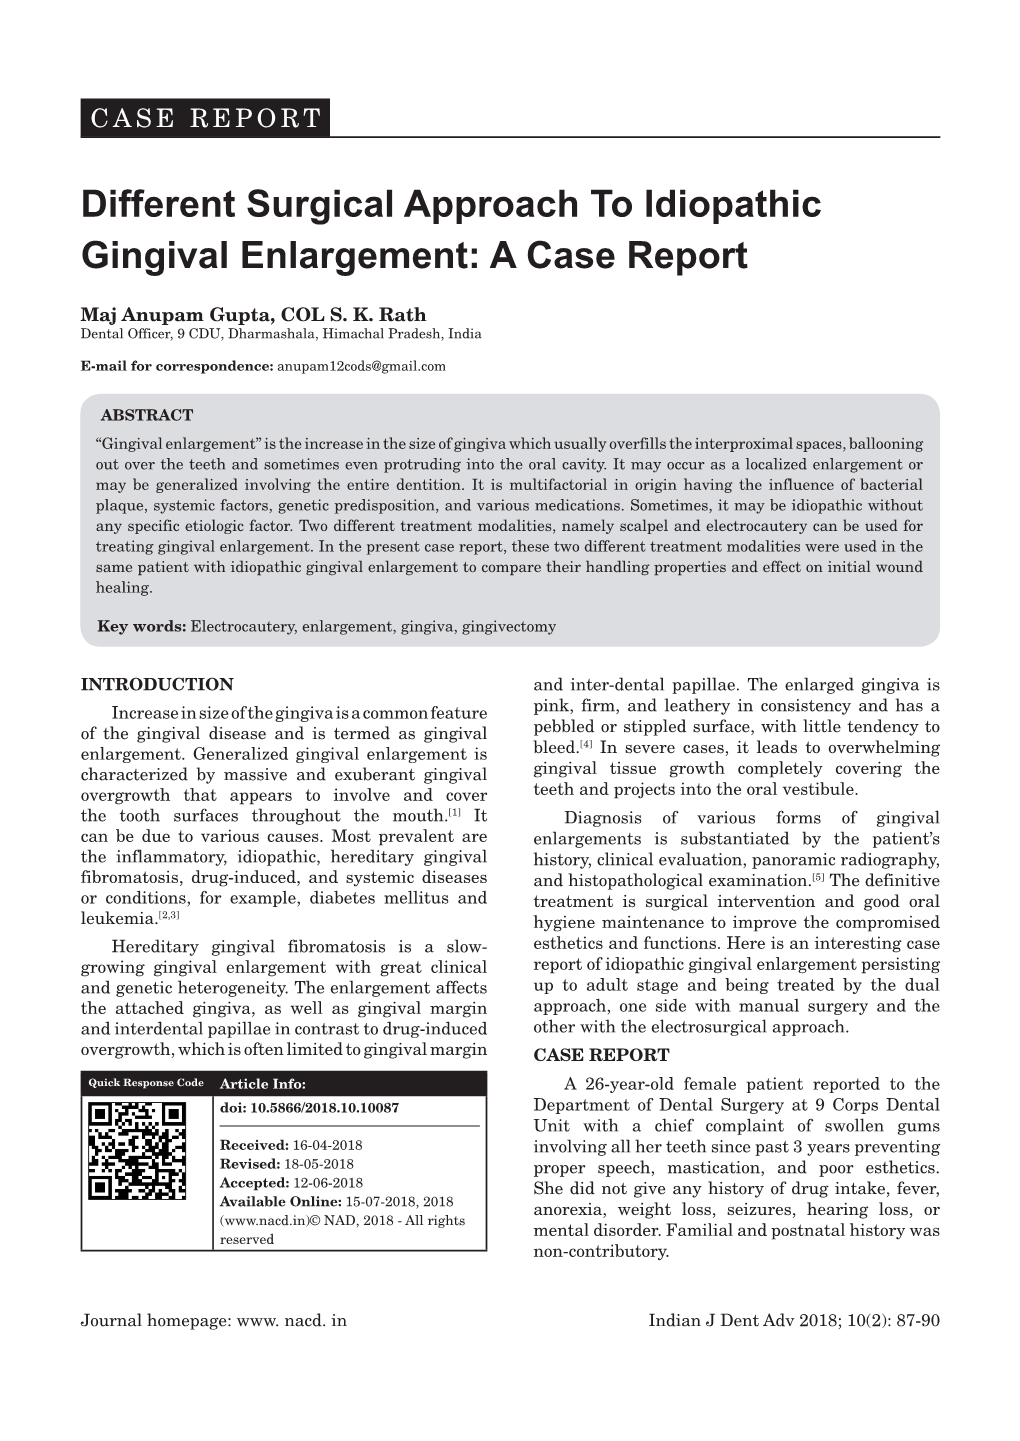 Different Surgical Approach to Idiopathic Gingival Enlargement: a Case Report